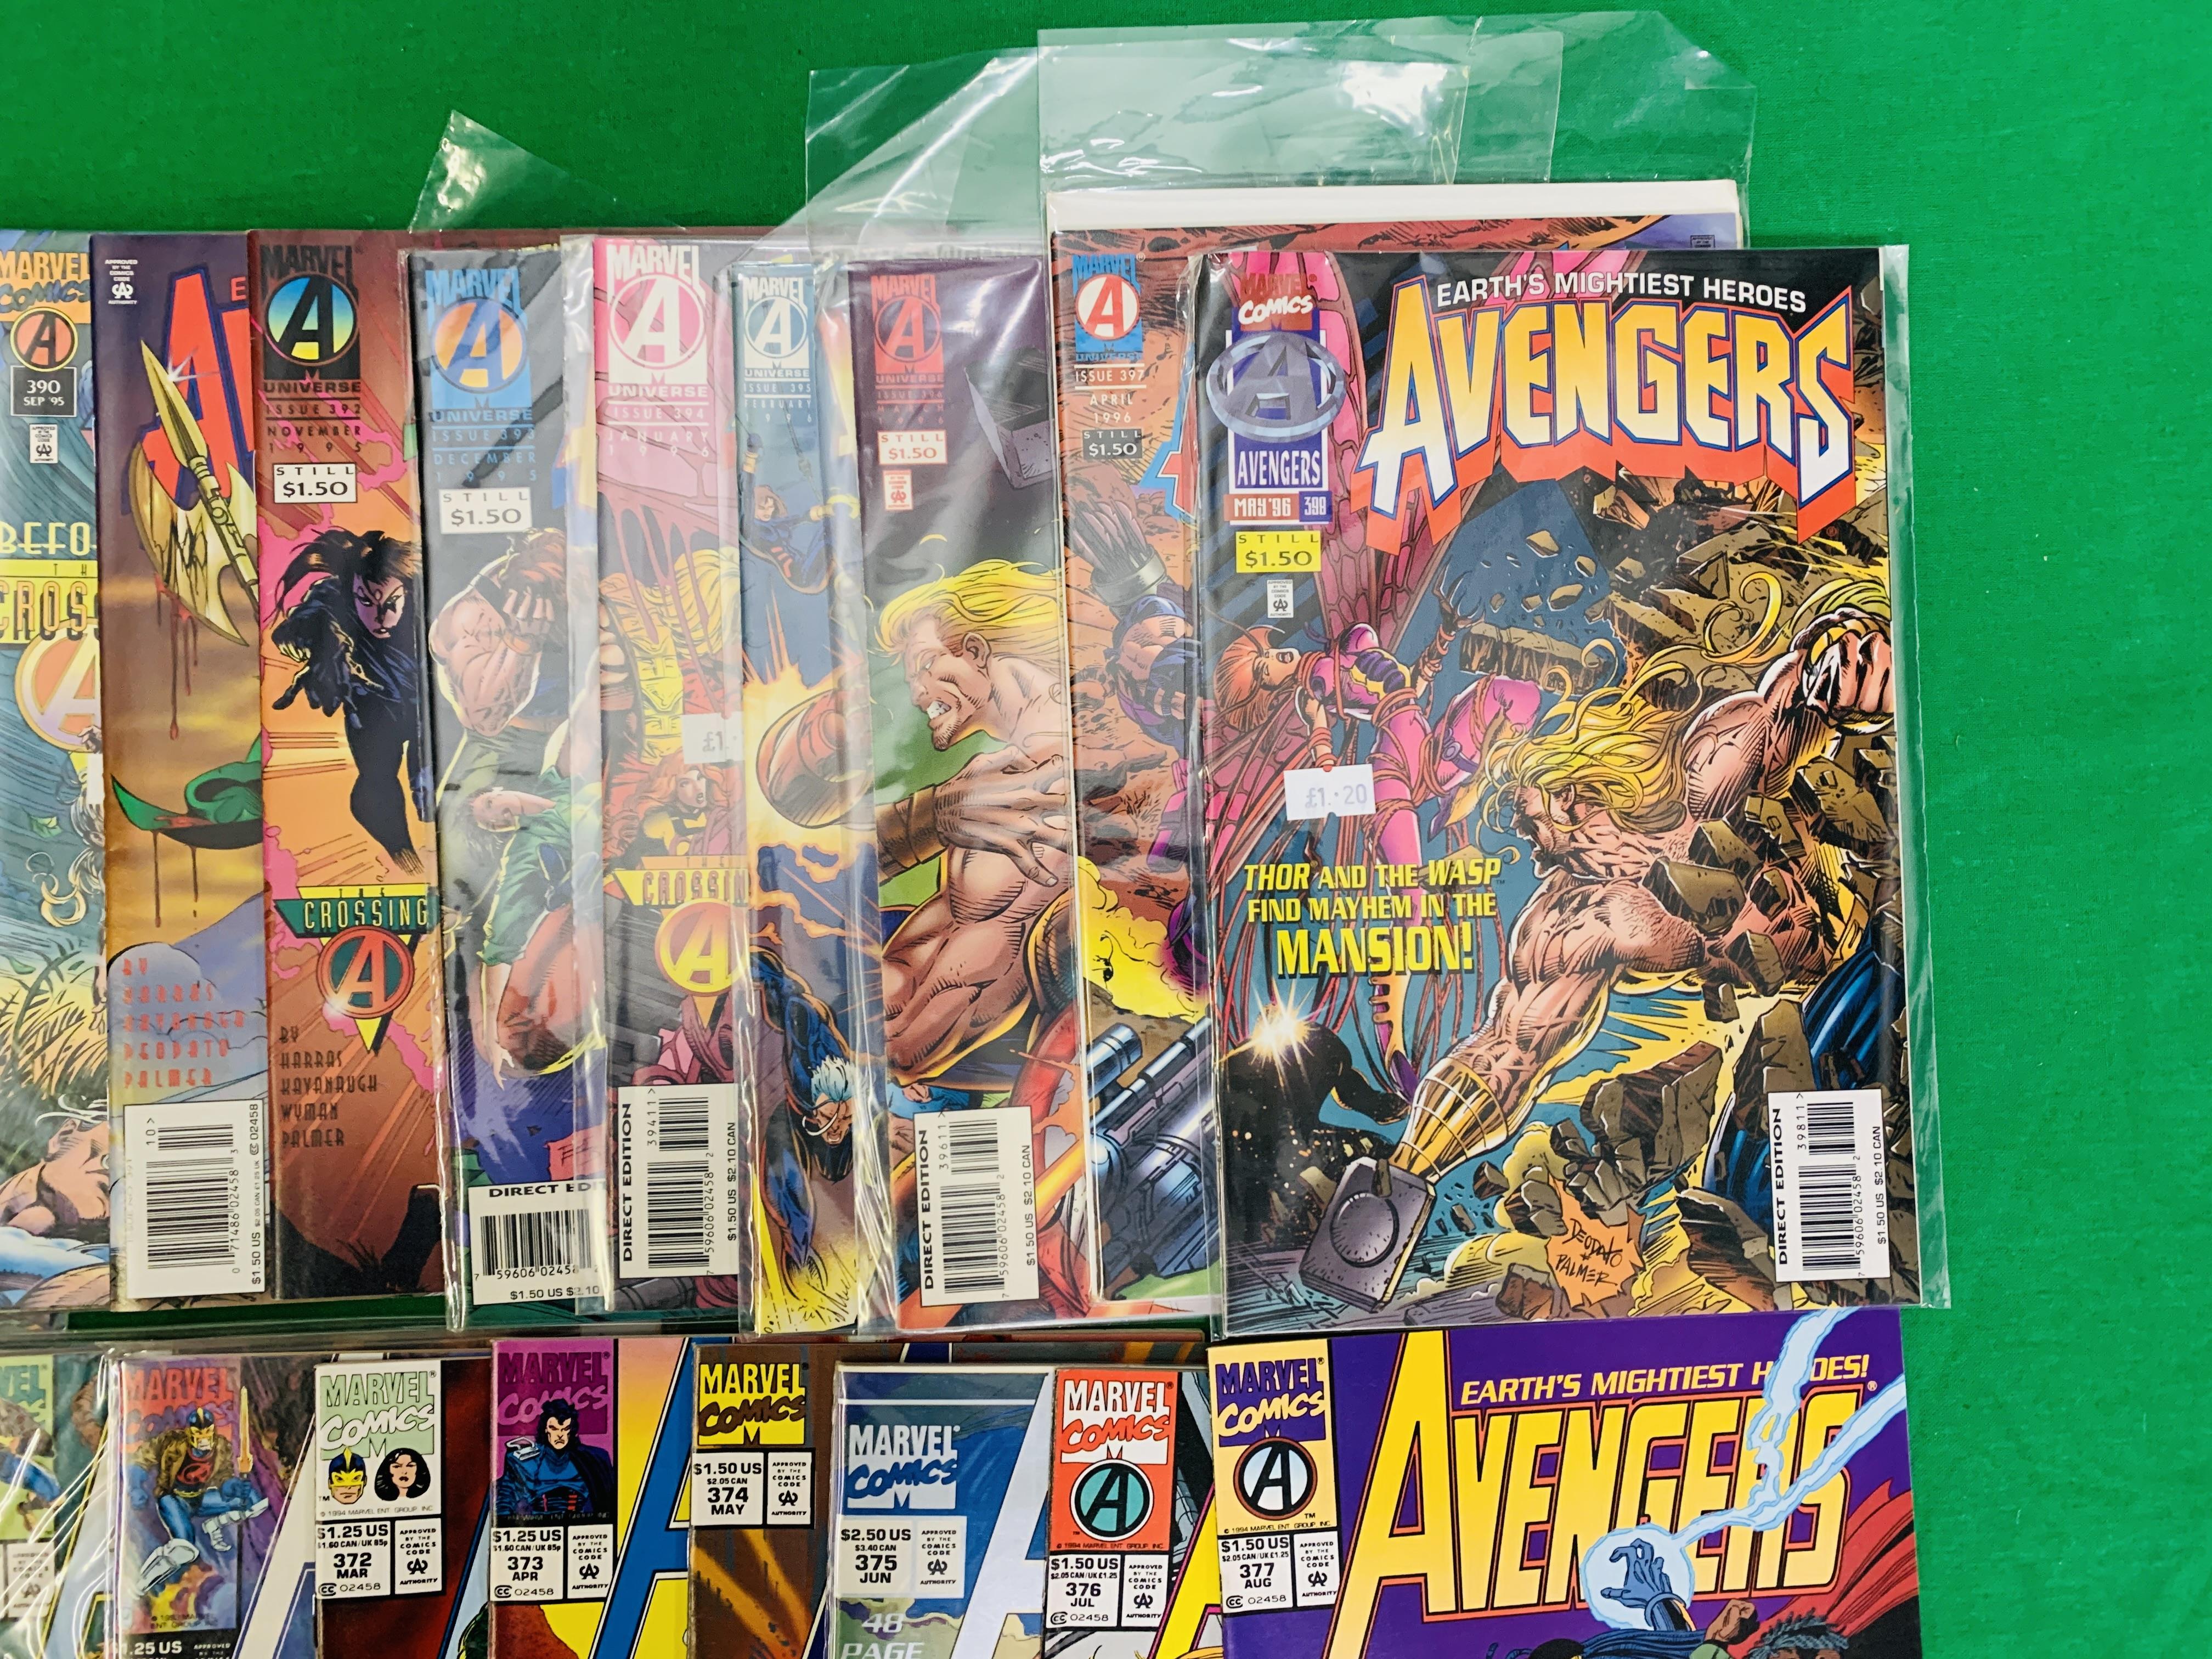 MARVEL COMICS THE AVENGERS NO. 300 - 402, MISSING ISSUES 325, 329 AND 334. - Image 16 of 16